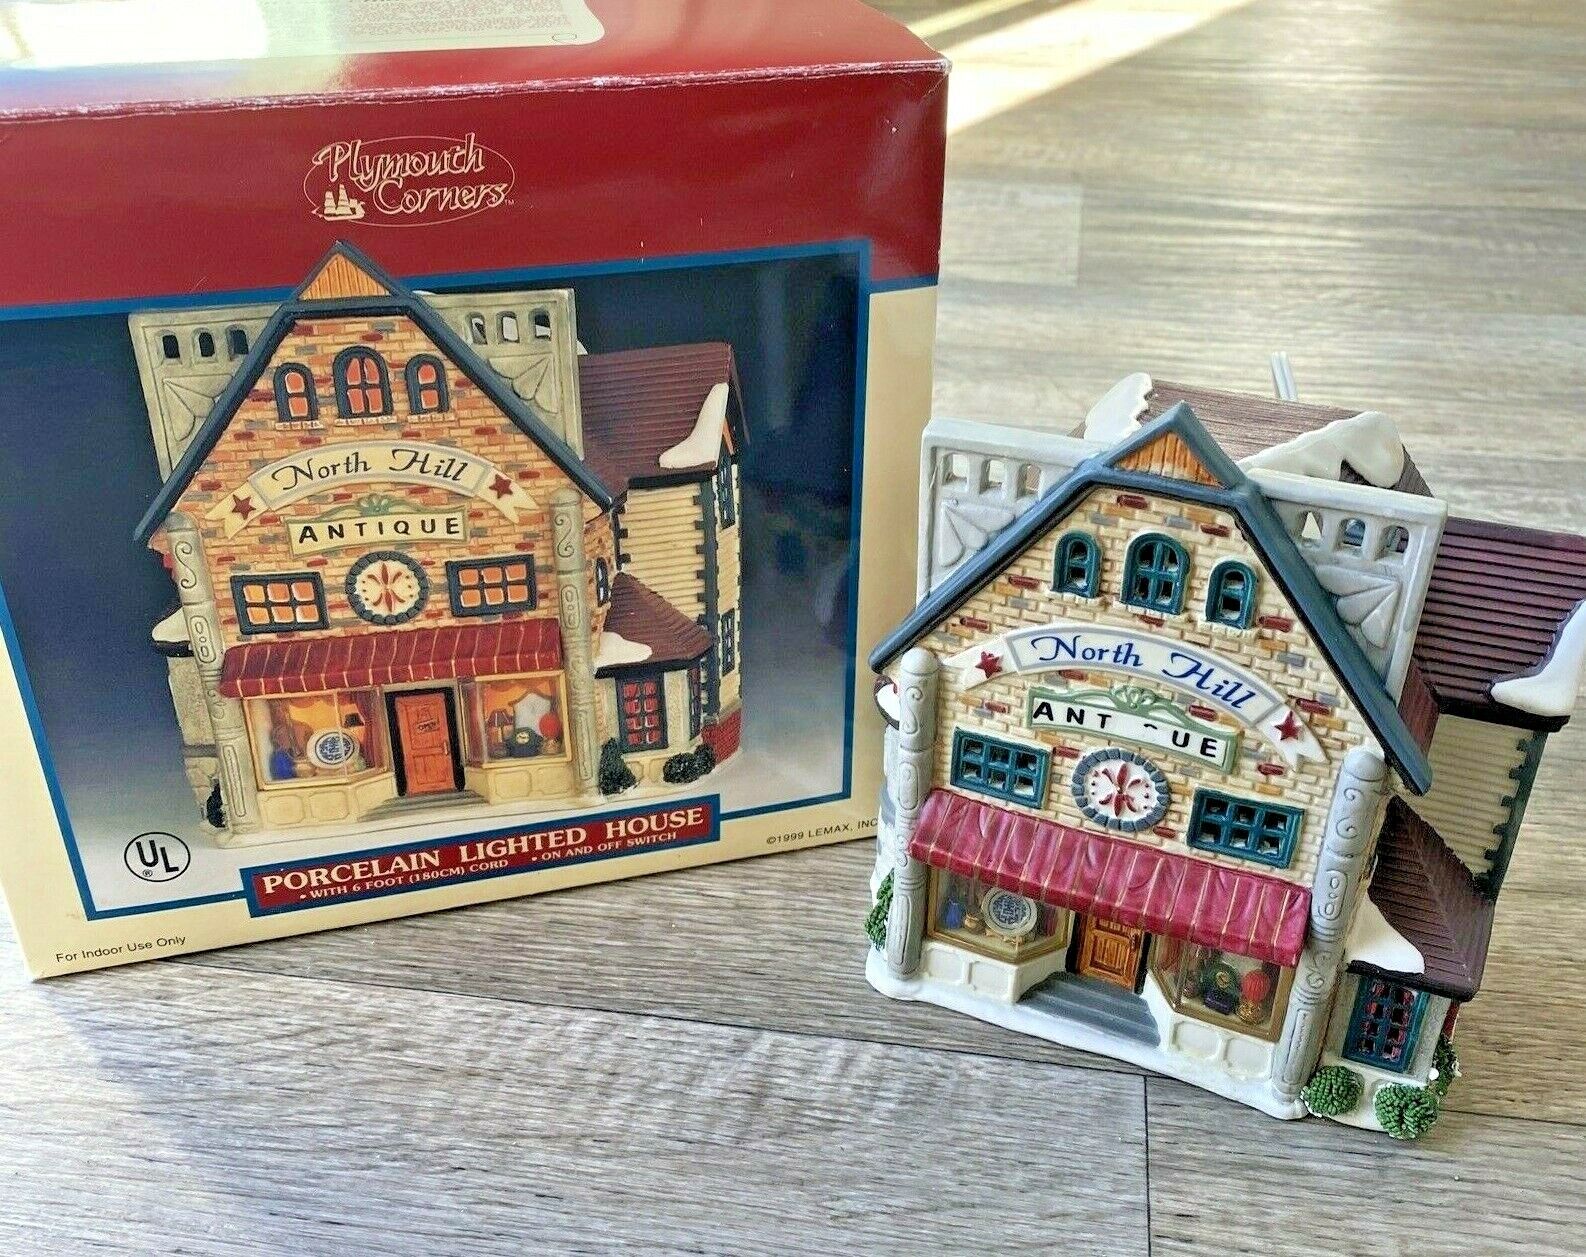 Lemax North Hill Antique Store Porcelain Lighted Christmas Village 1999 w/Box